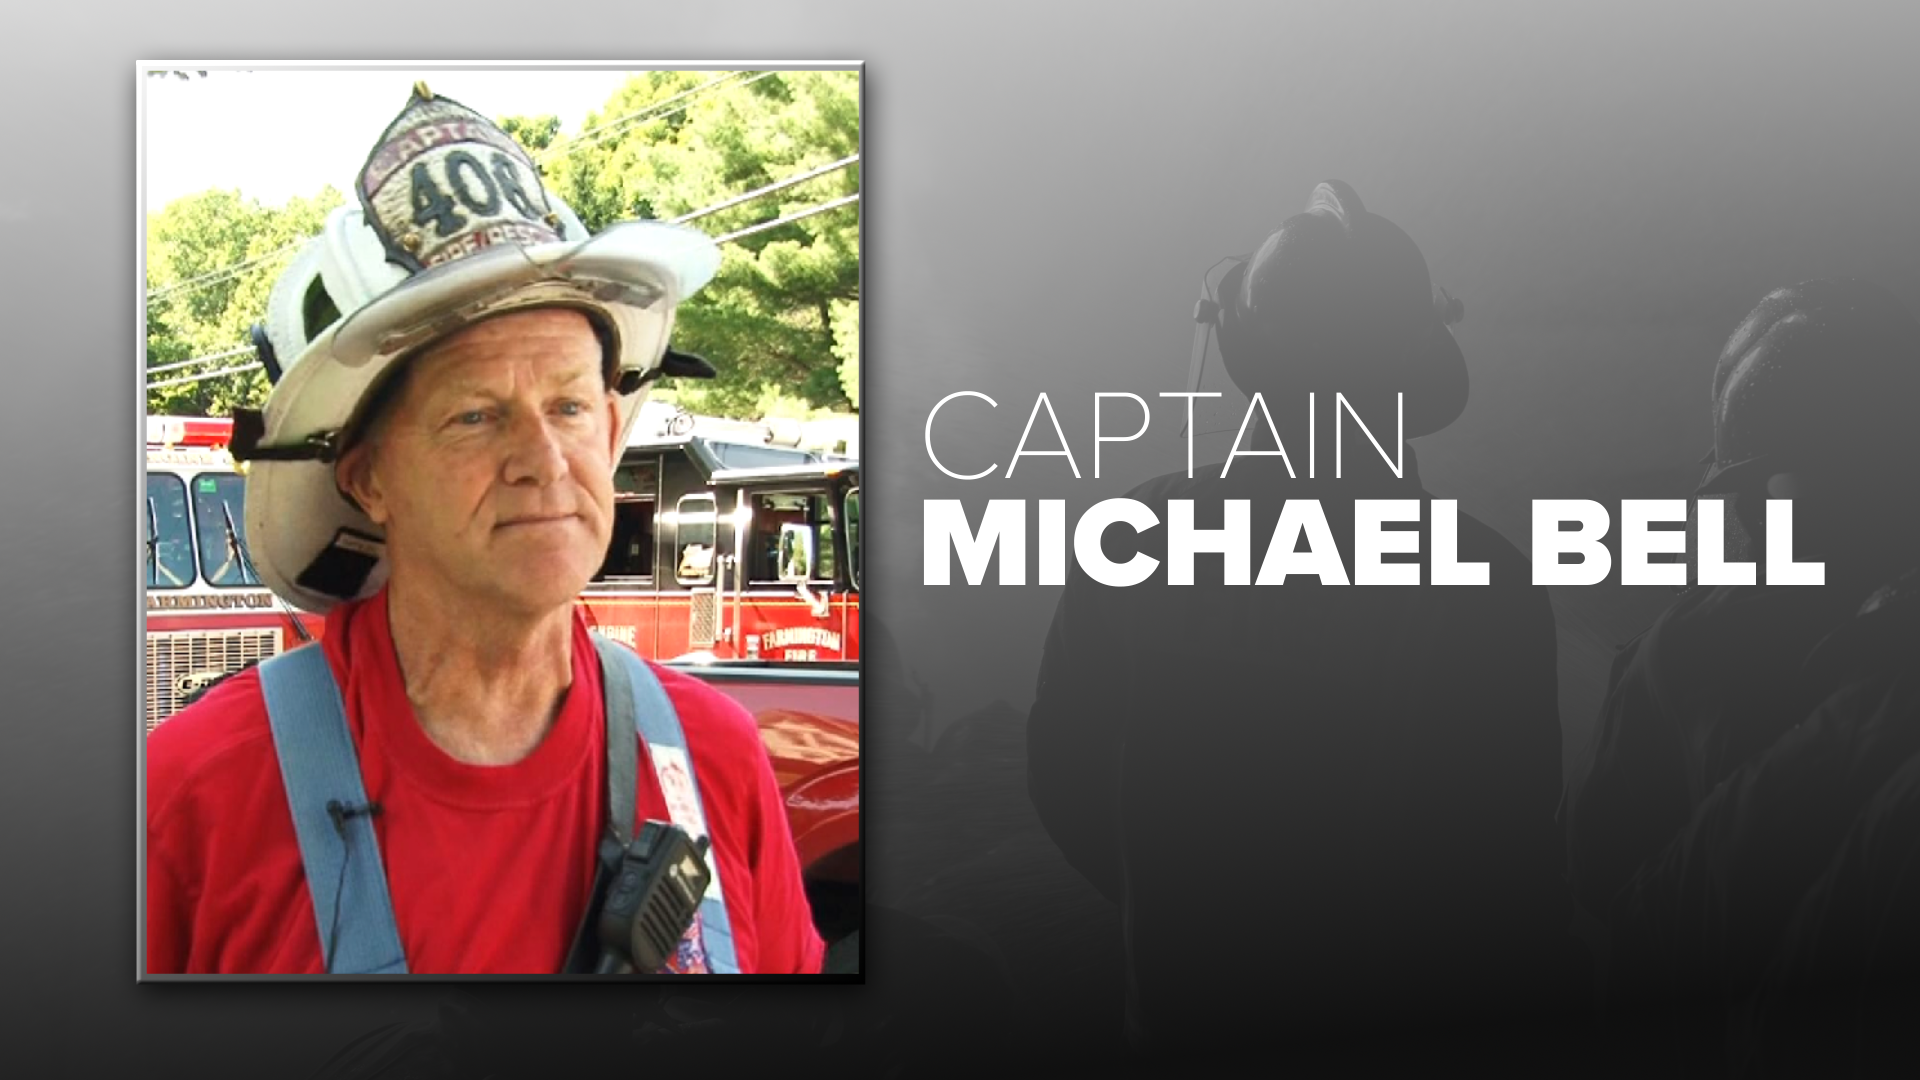 Fire Captain Michael Bell died in an explosion in Farmington three years ago. Bell is credited with saving multiple lives by getting people out of the building.